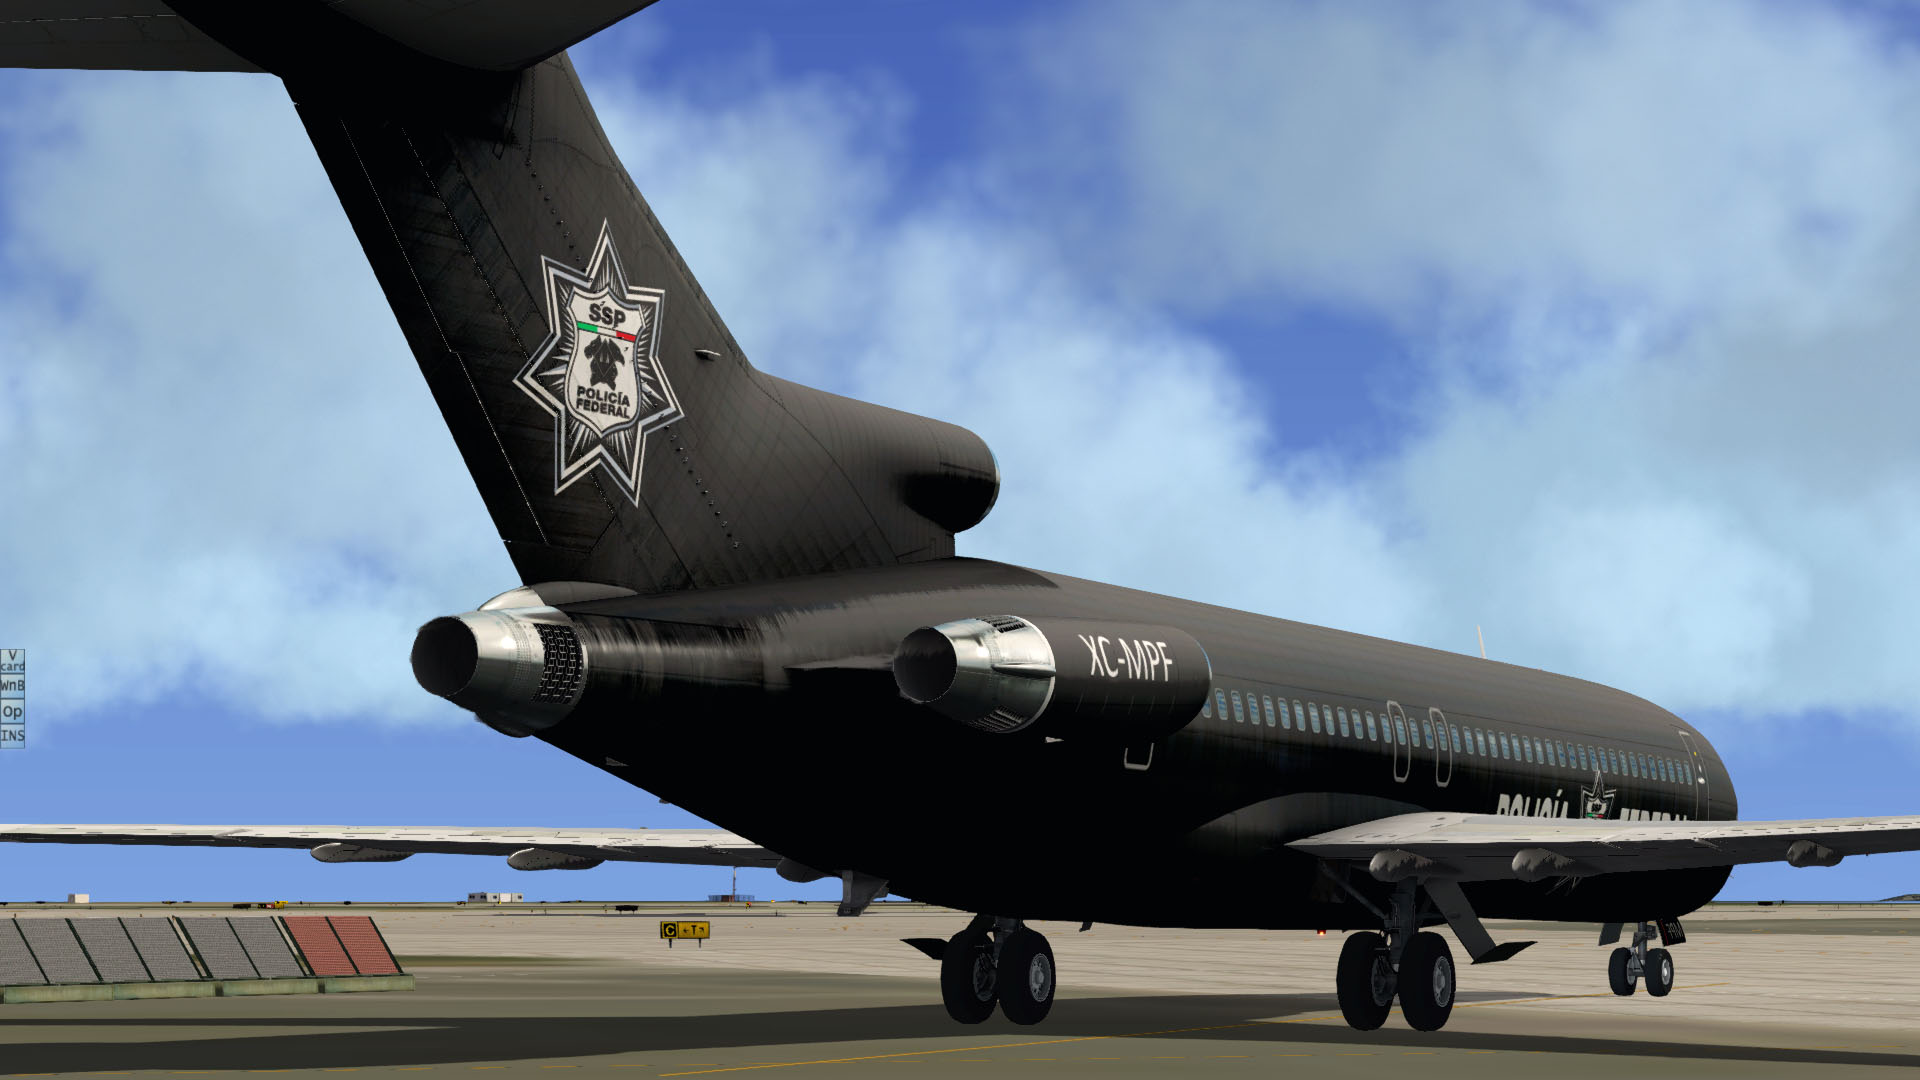 More information about "Policia Federal - Boeing 727-200Adv"